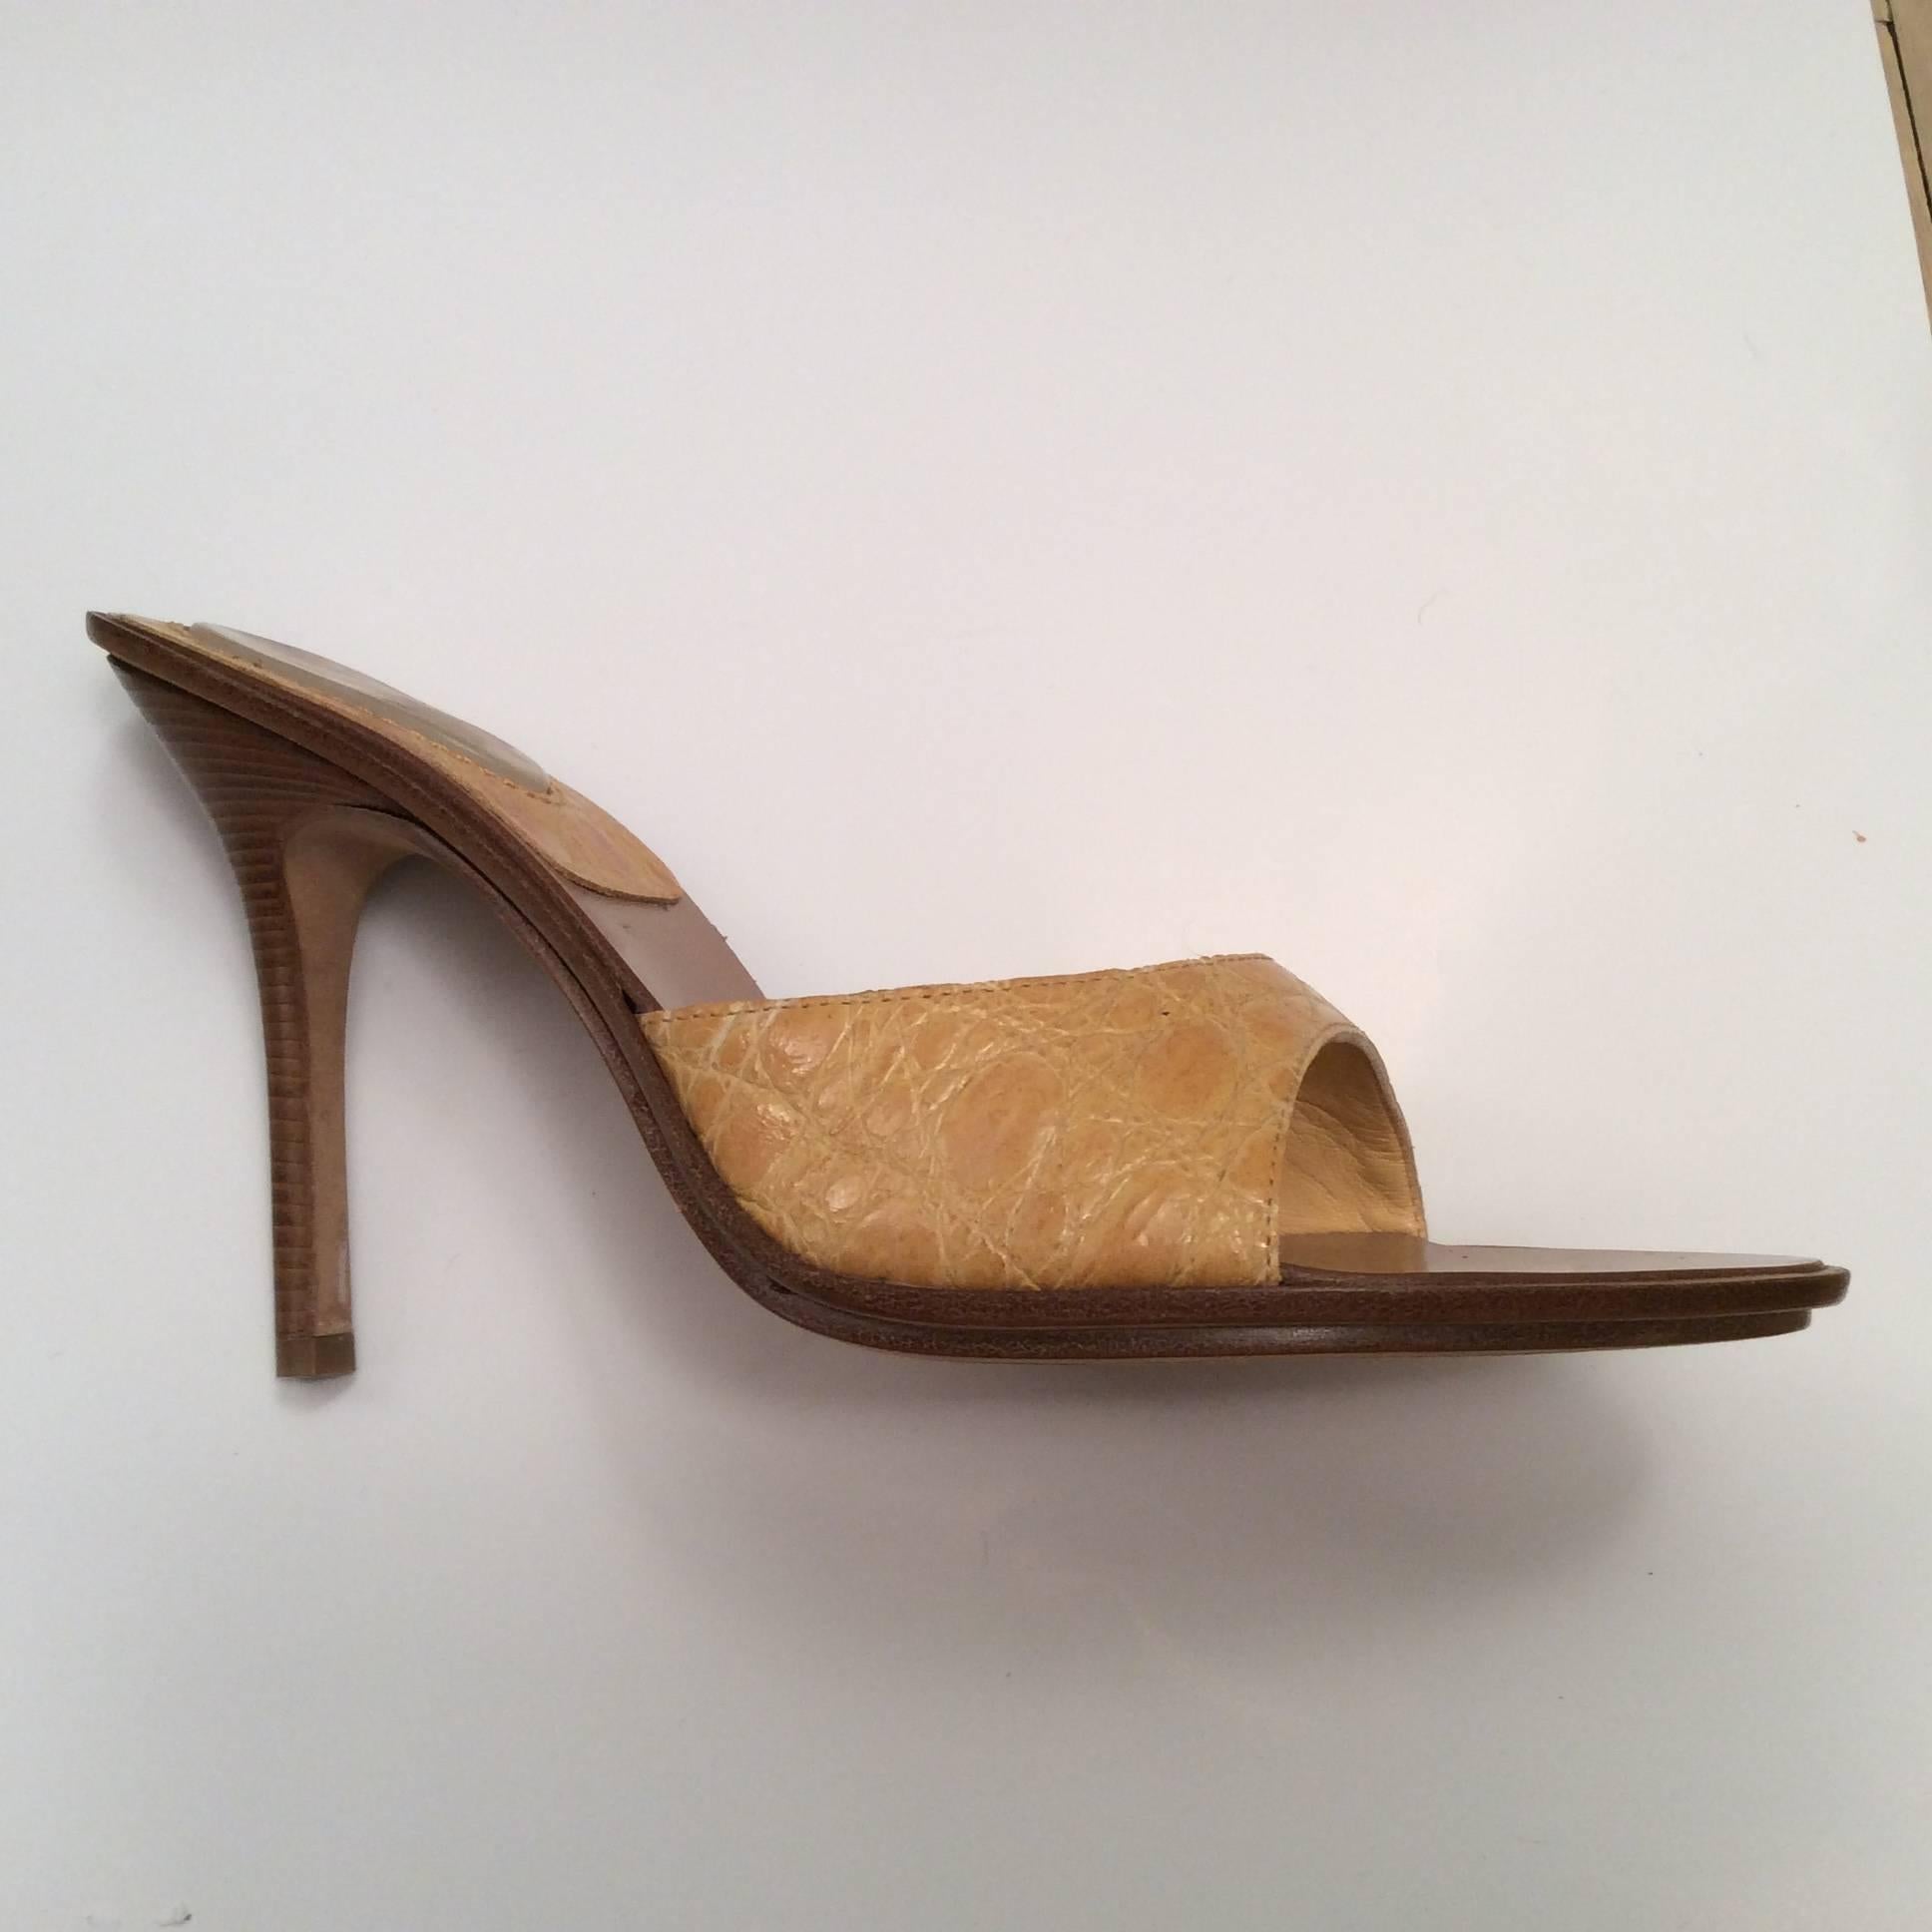 These lovely yellow alligator Casadei heels have a 4 inch wood heel. They are made in Italy. They are a size 7 but seem to run a little big. They are priced to sell at 150. 